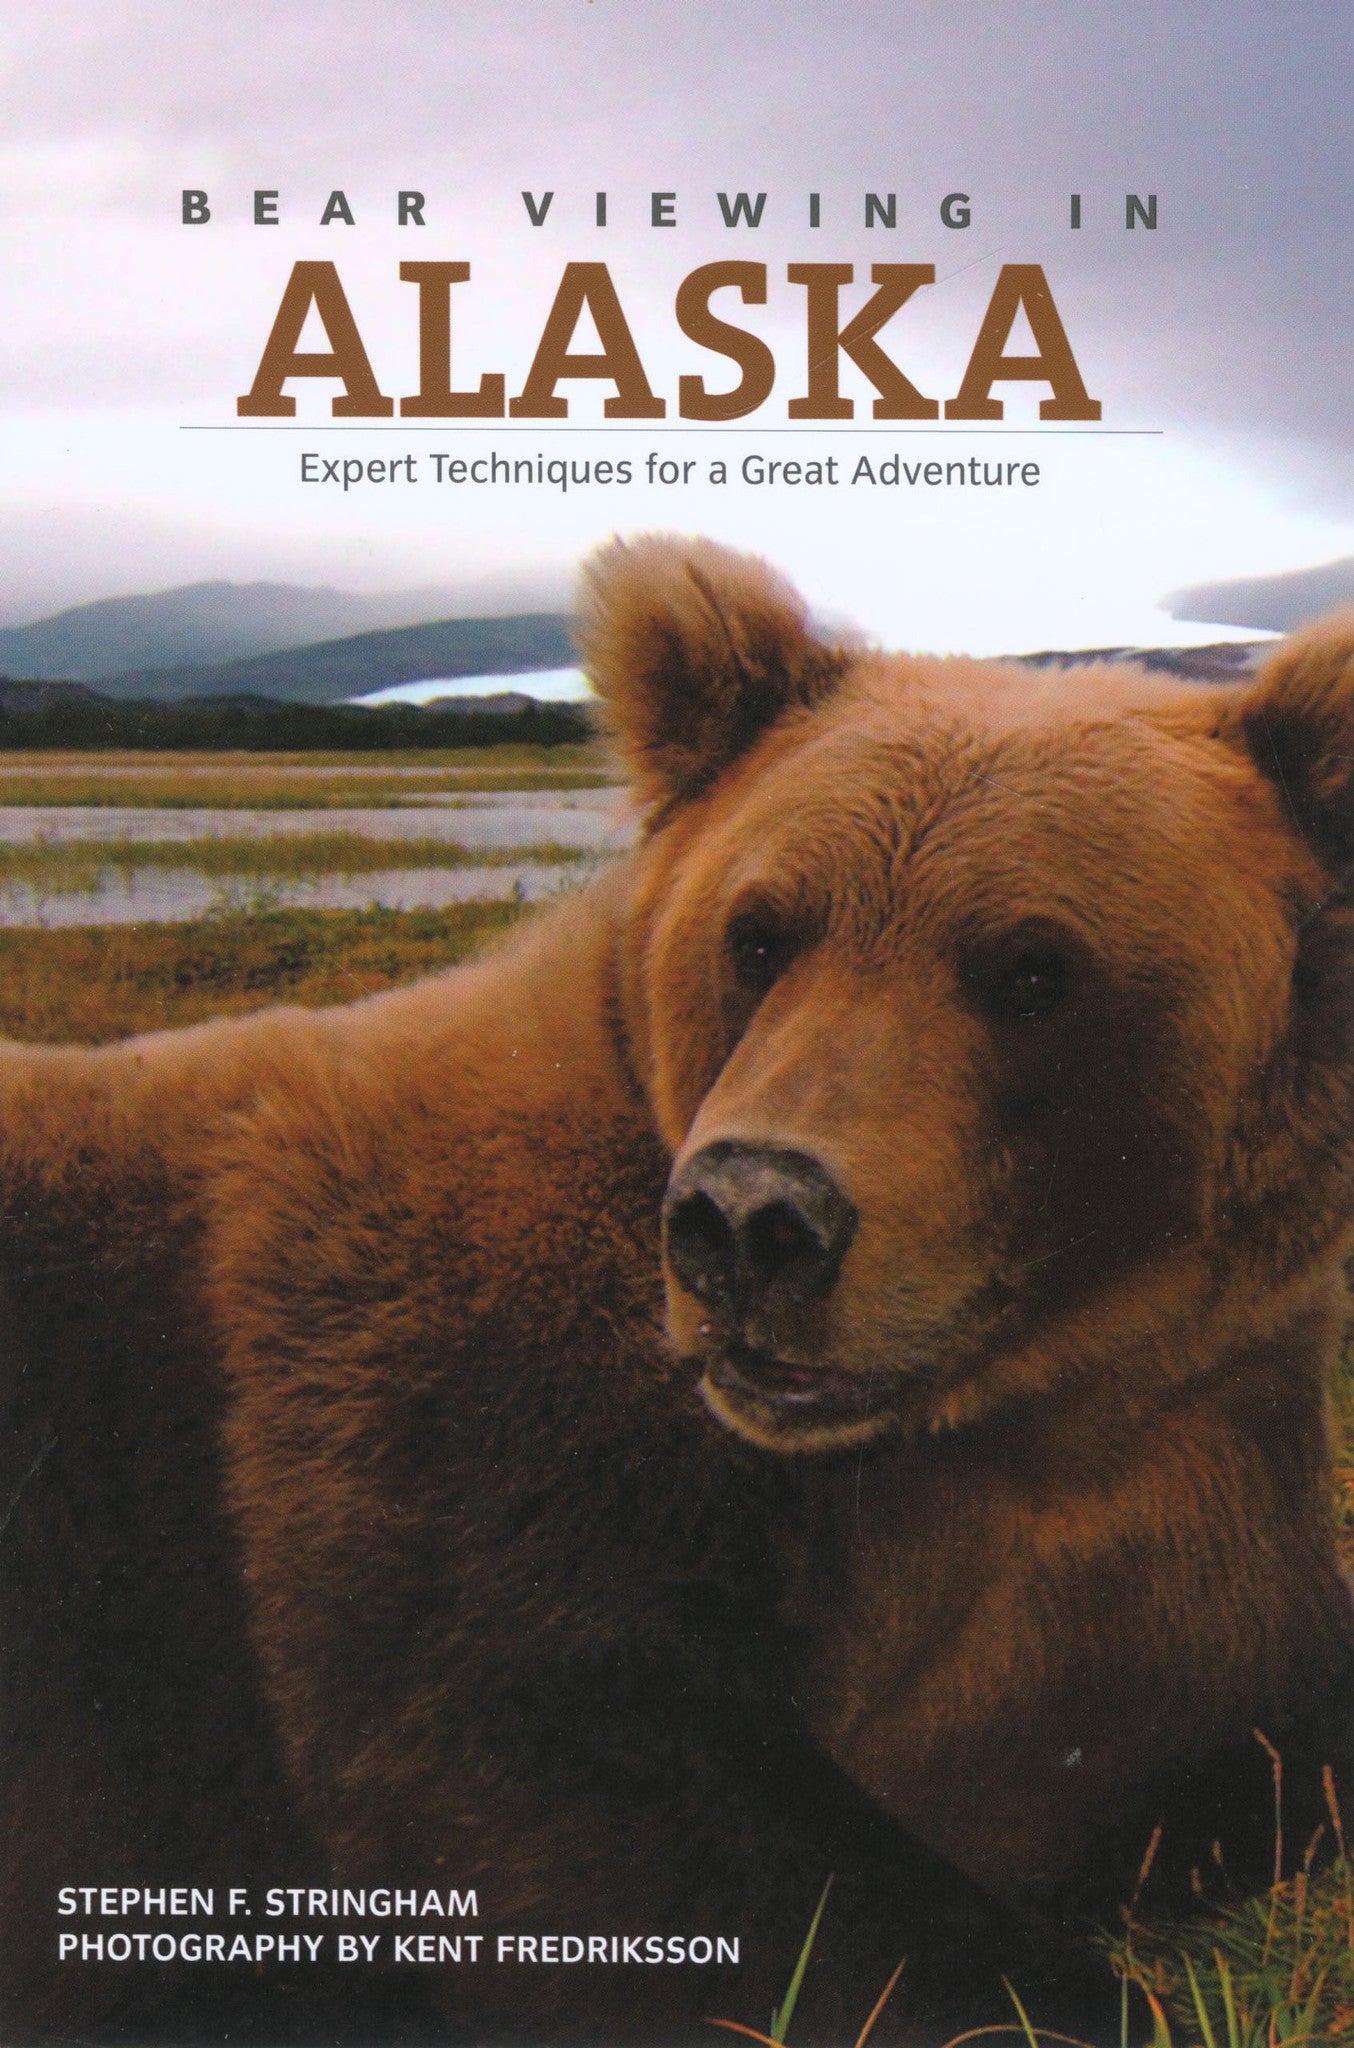 Bear Viewing in Alaska: Expert Techniques For A Great Adventure by Stephen F. Stringham